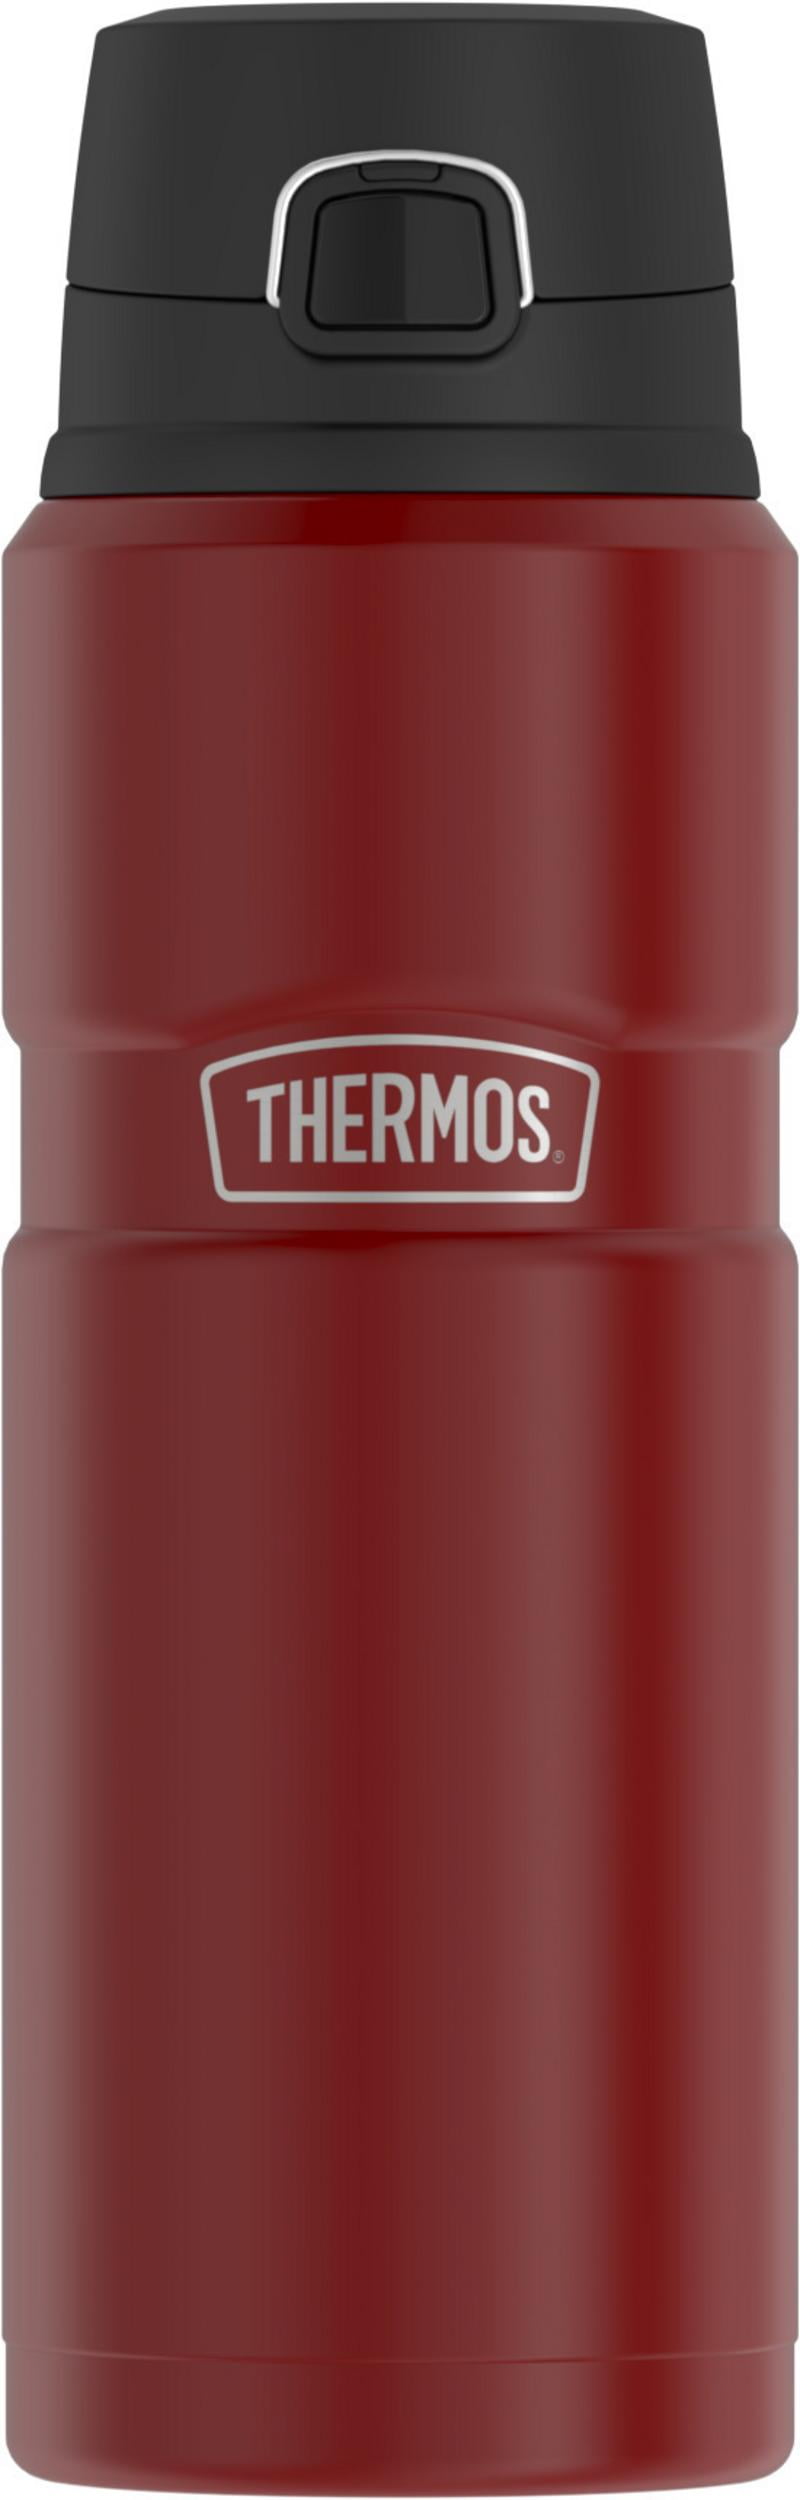 Vintage Wide Mouth Red Brown Plastic Thermos Insulated/vacuum Sealed Jar  Camping/hiking/lunch Bag Model 5002 Sold Separately -  Sweden